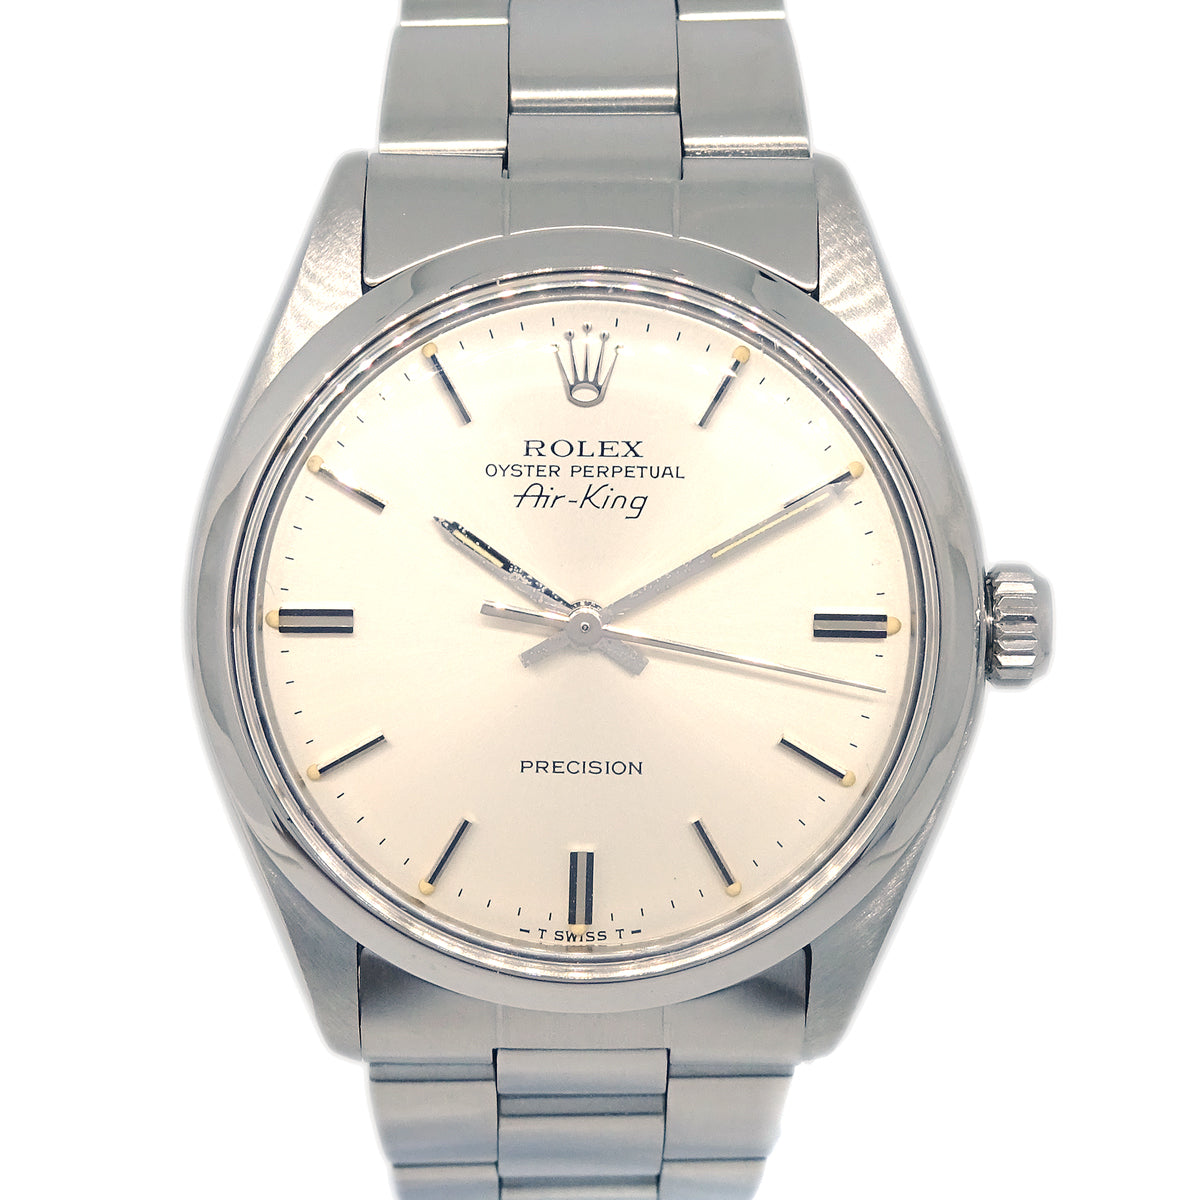 Rolex Oyster Perpetual Air-King 34mm Ref.5500 Watch SS